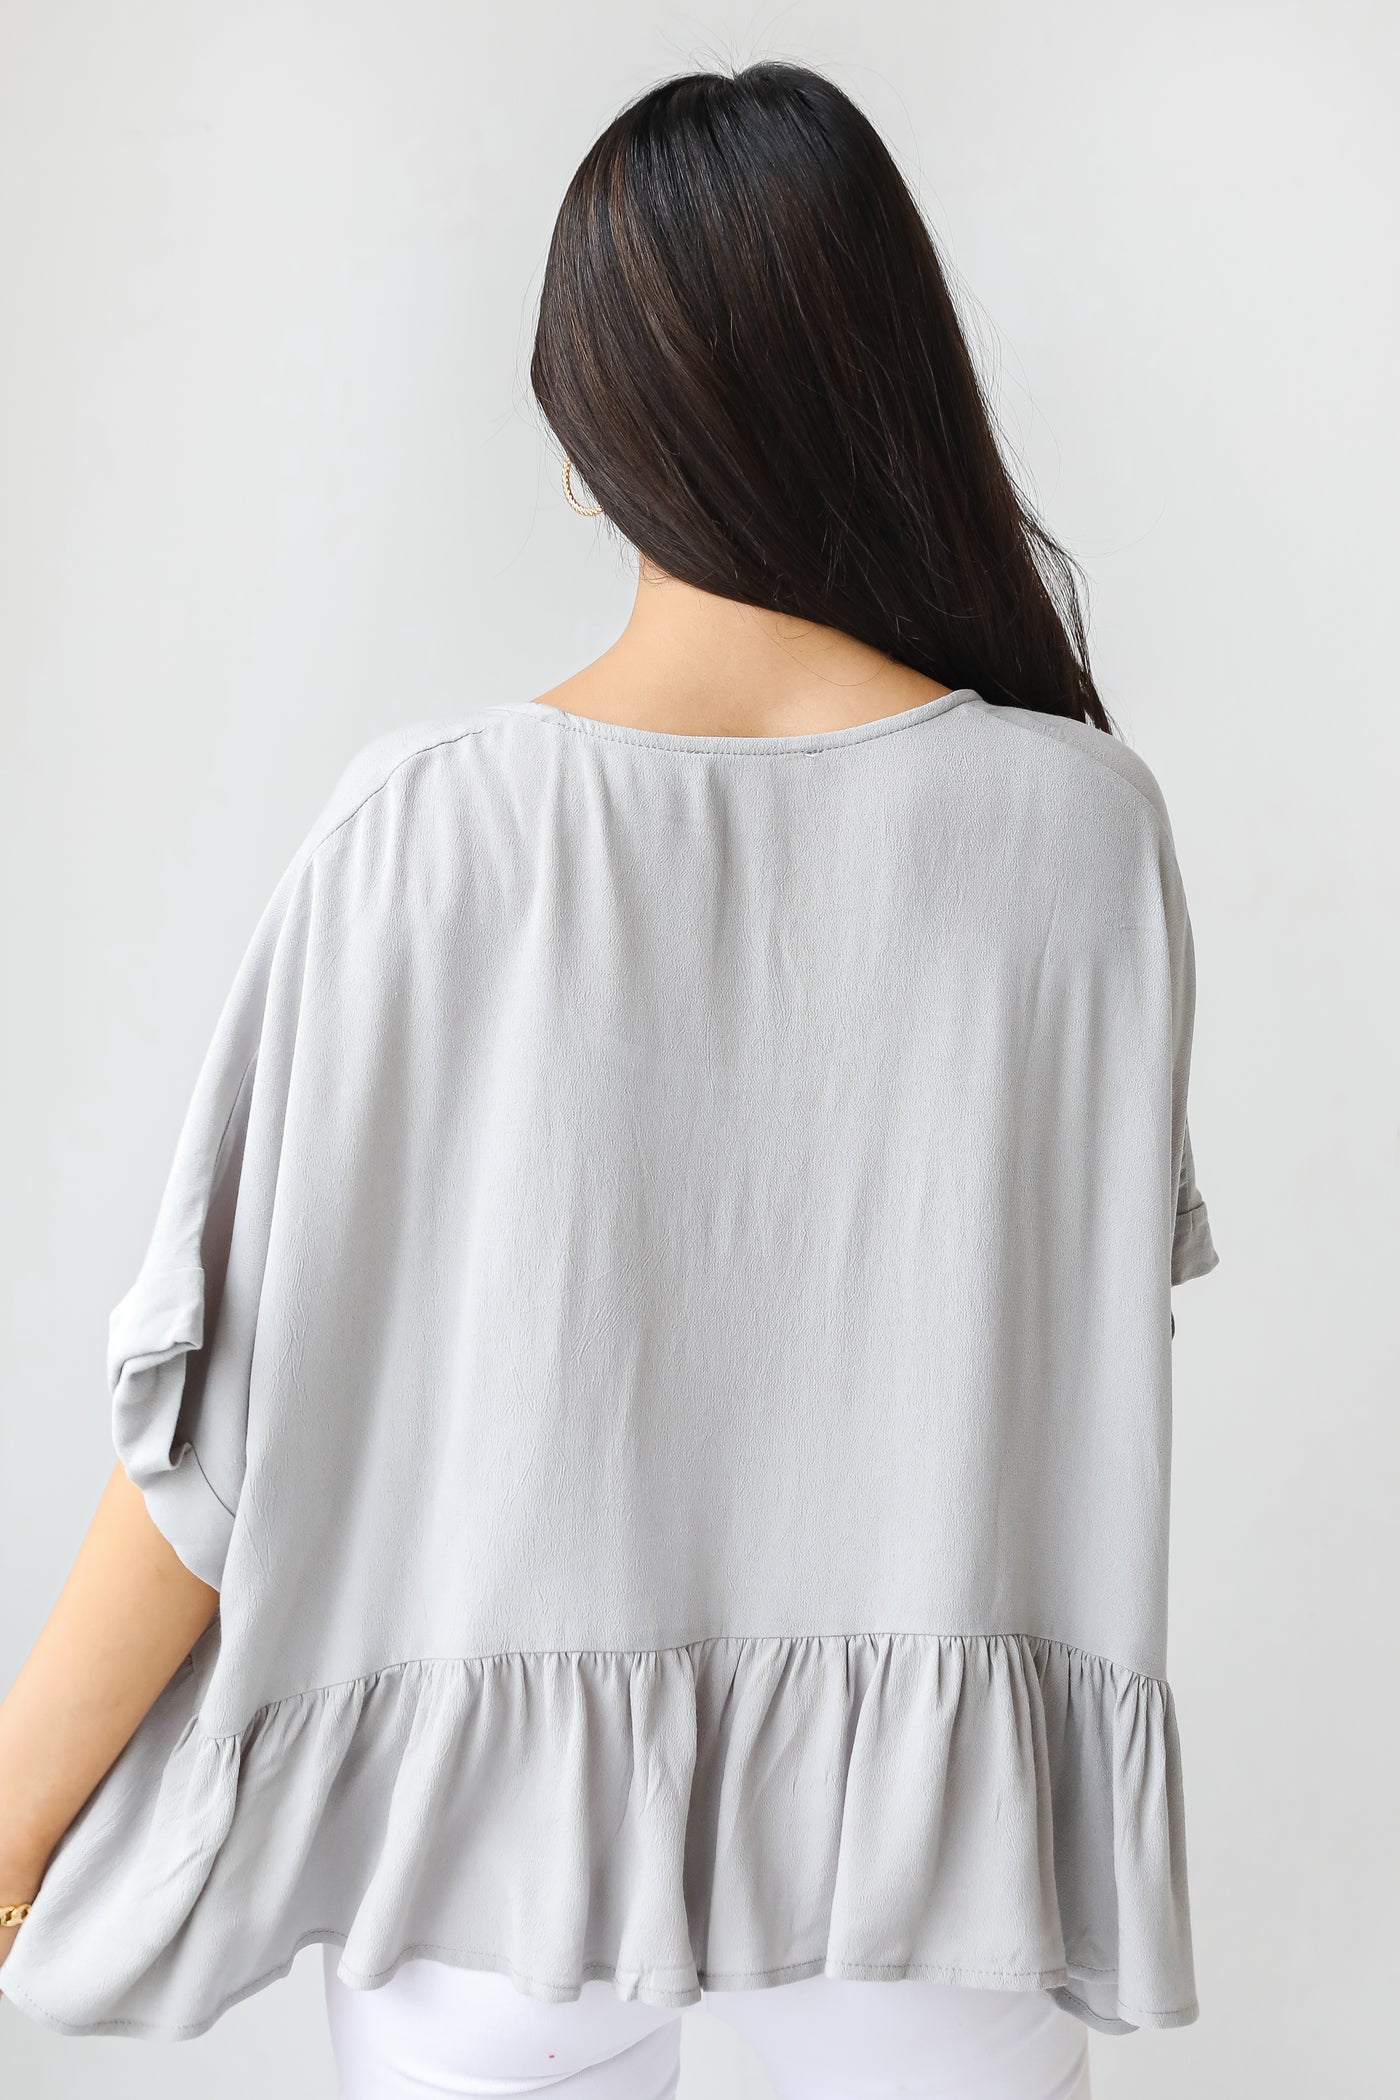 Peplum Blouse in grey back view